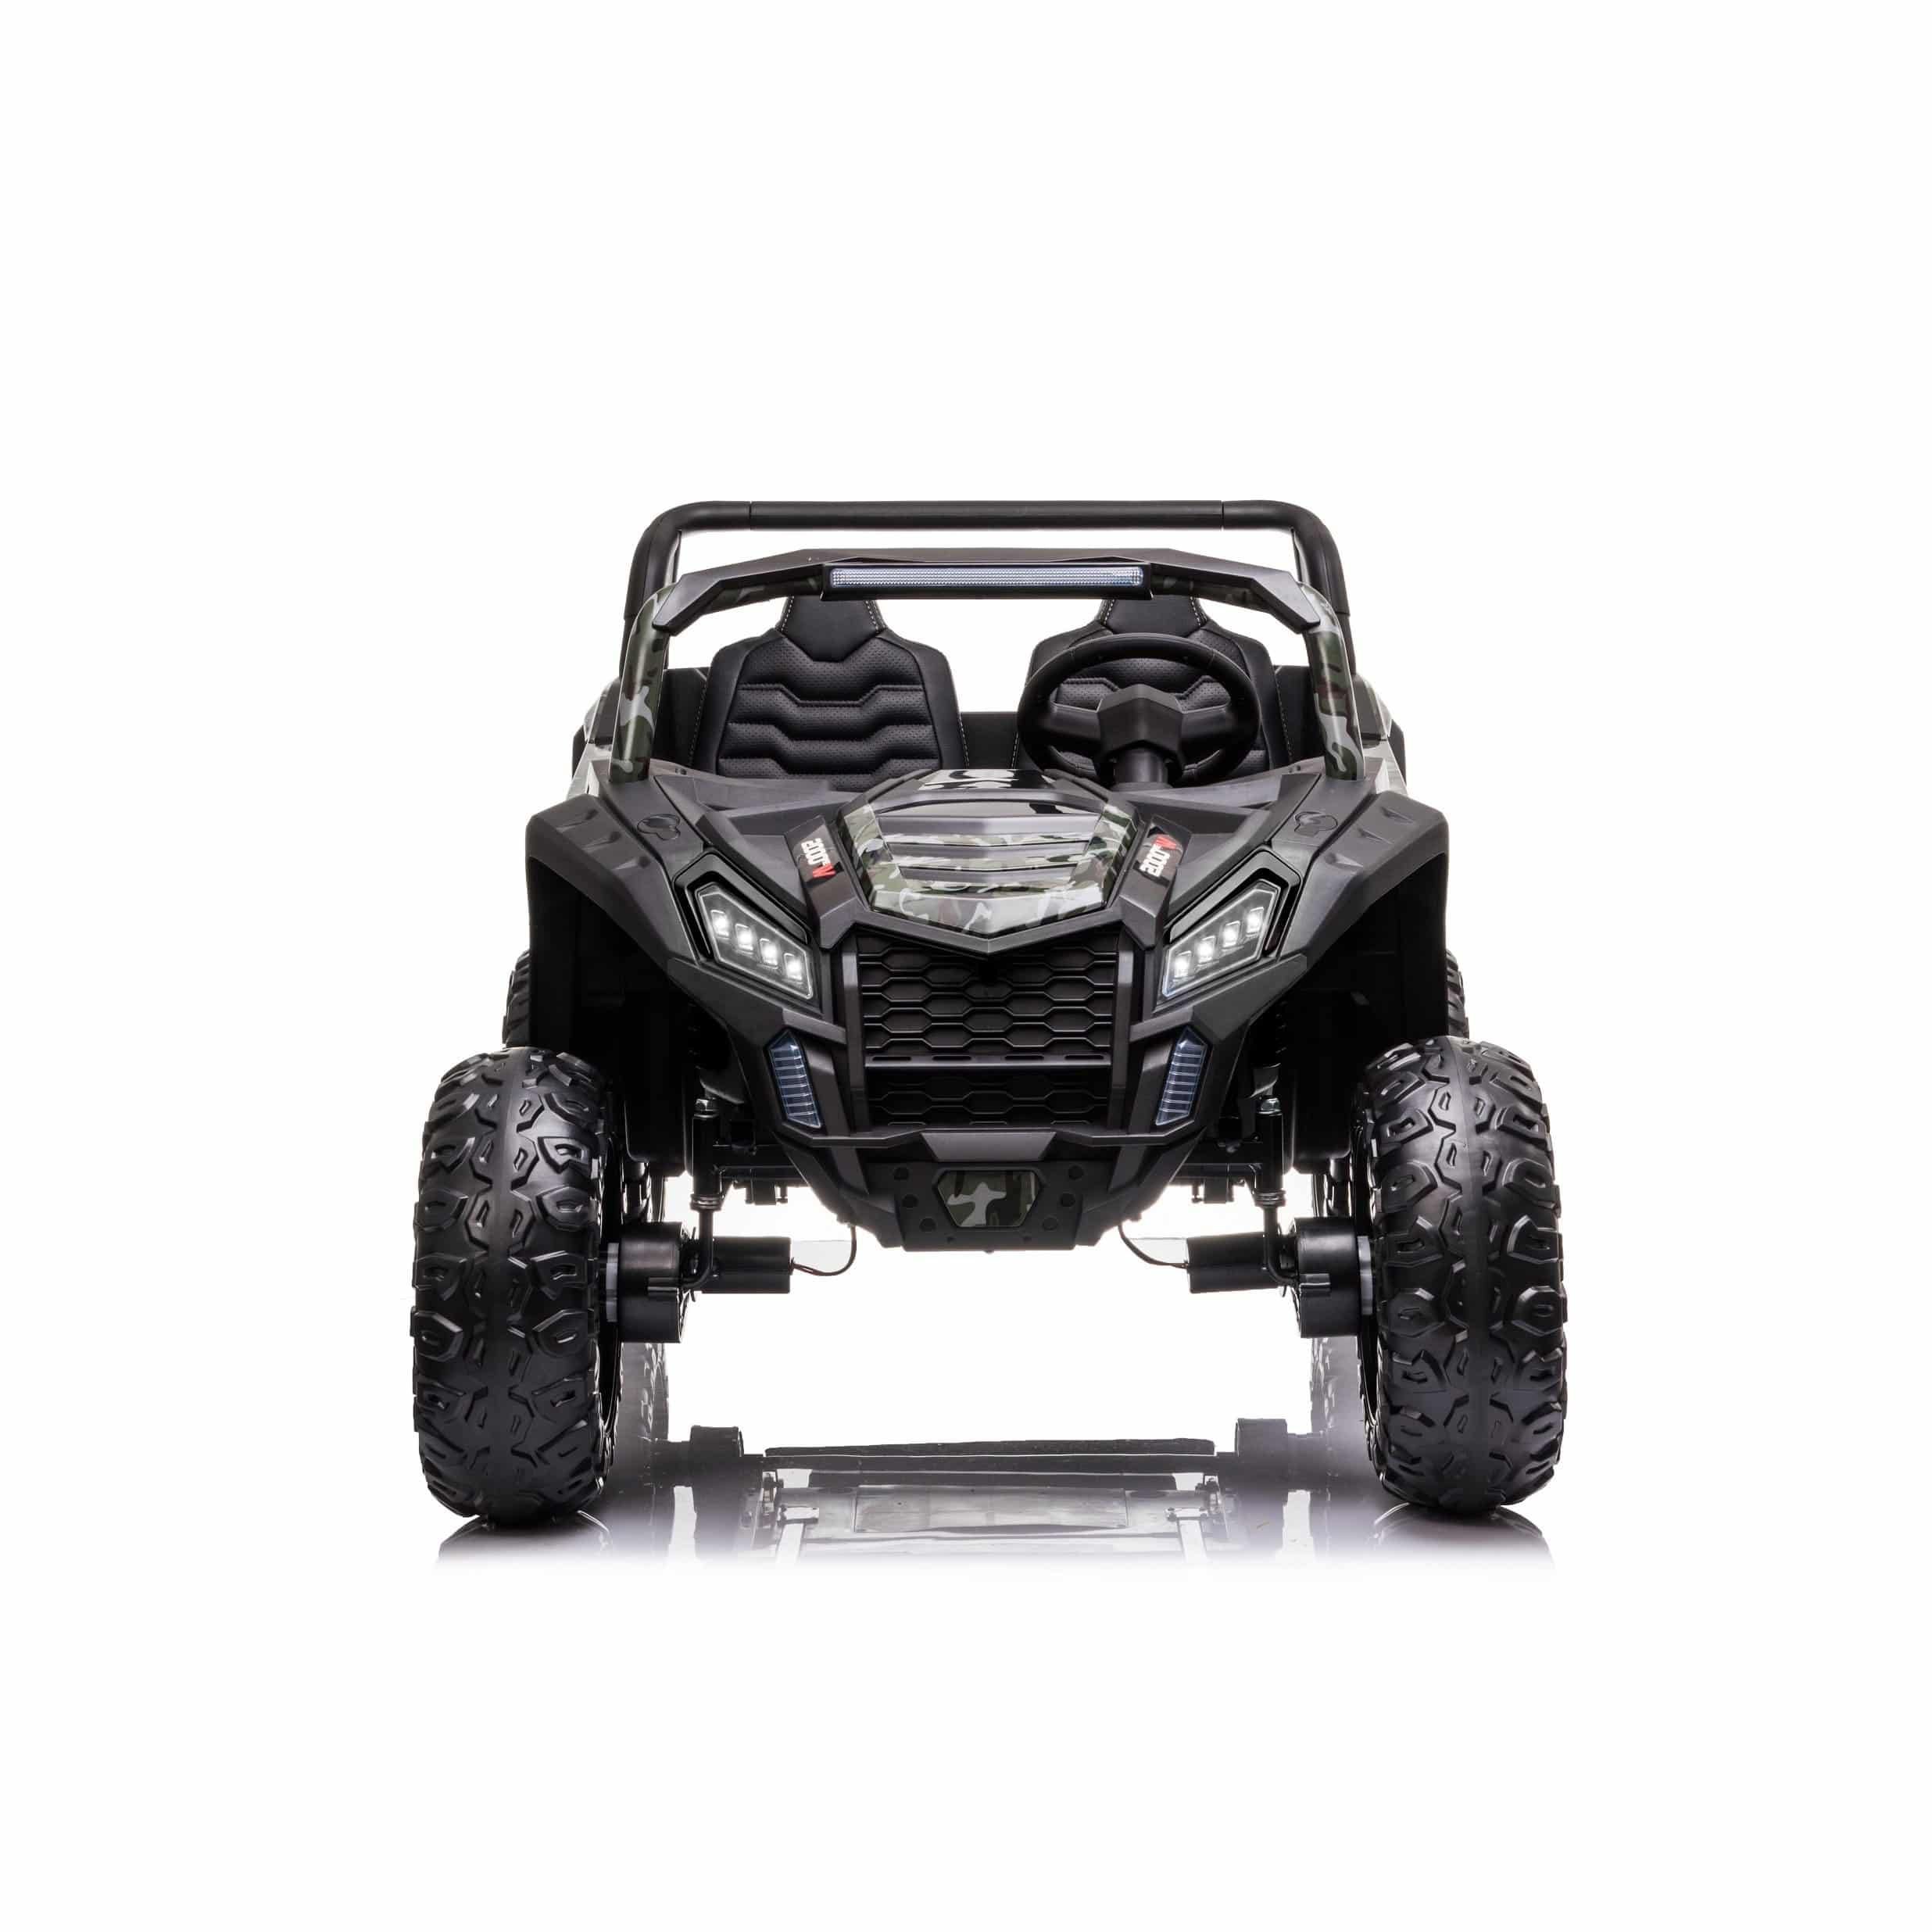 2022 24V 4x4 2 Seater Freddo Dune Buggy with Parental Remote Control - Freddo Kids Cars CA - Ride On Toys Store